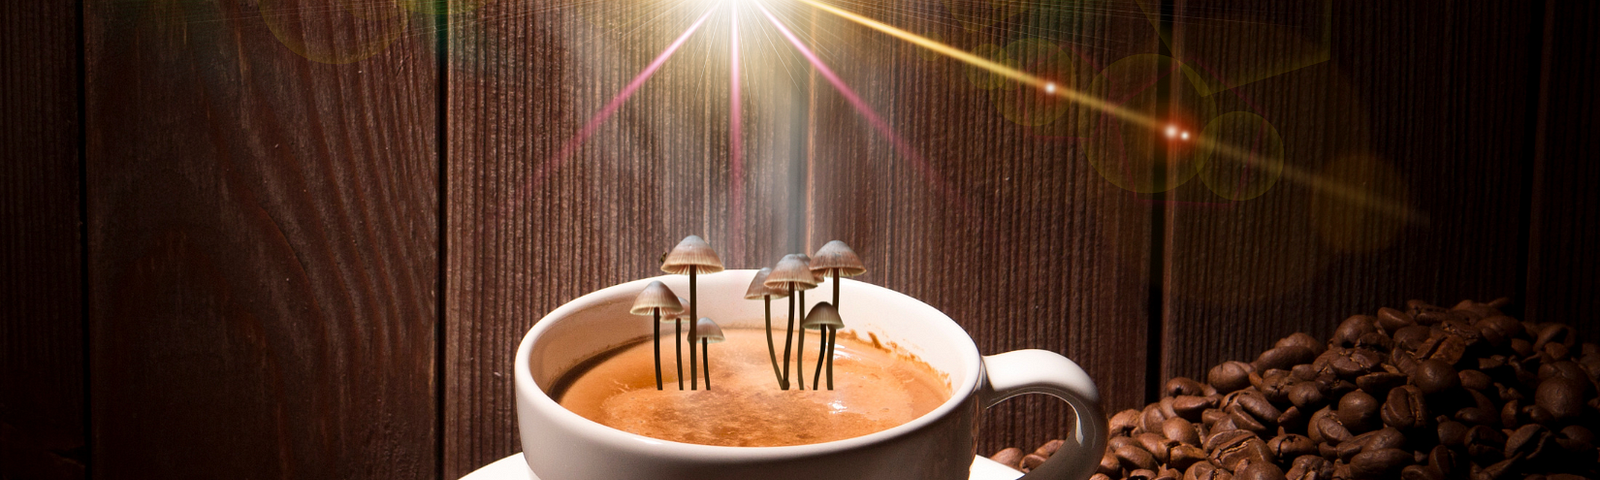 A cup of coffee with mushrooms sprouting from it; a glowing light above